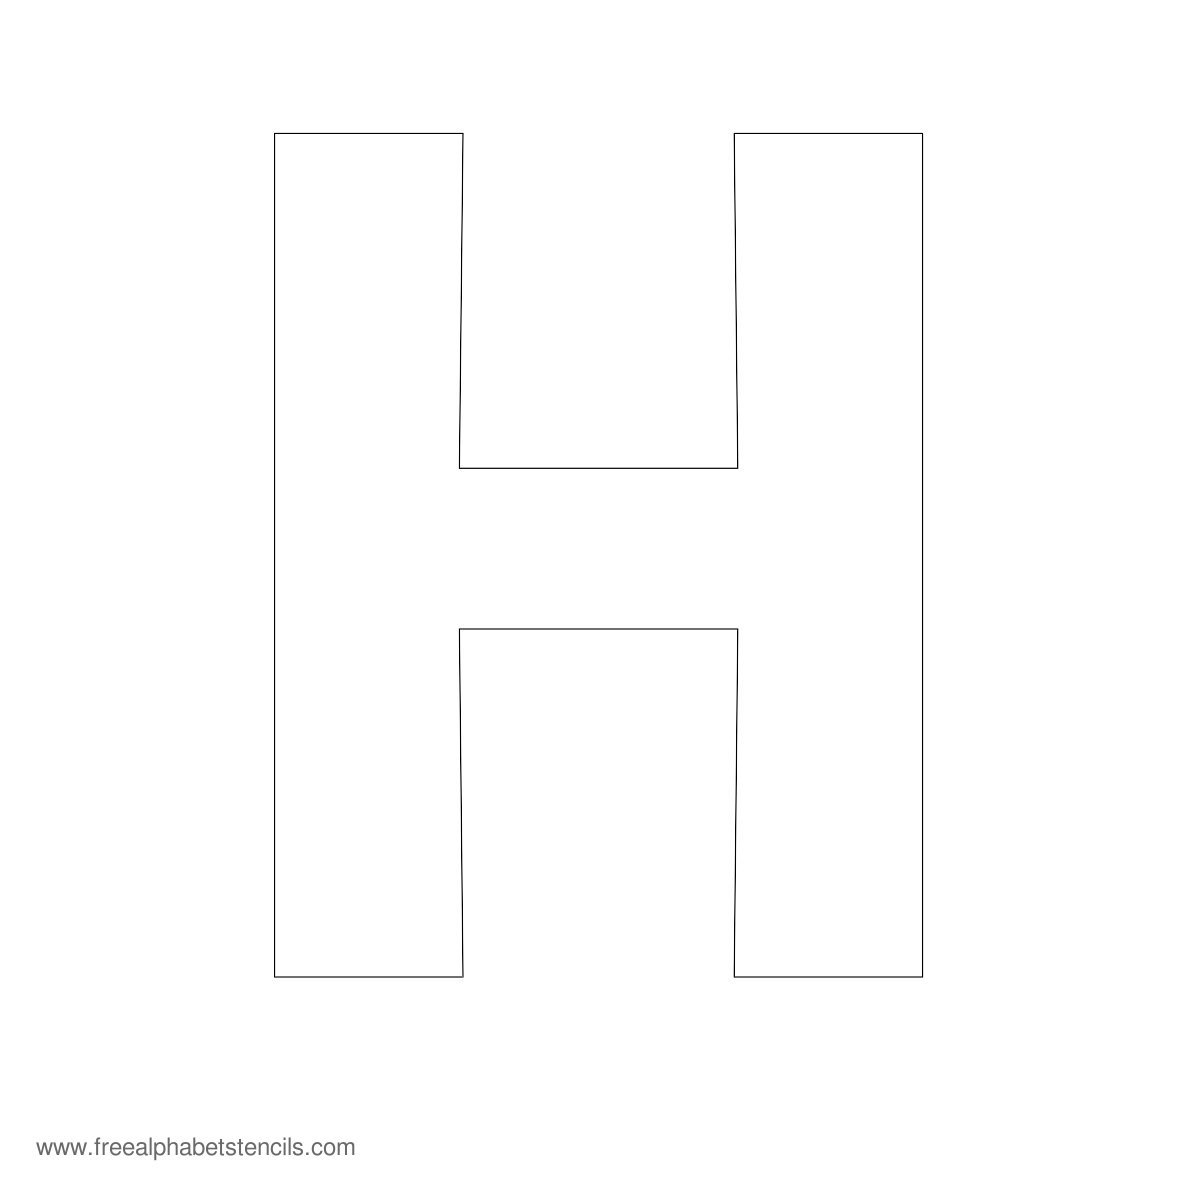 4 Best Images of Large Printable Alphabet Letter H - Free Printable ...